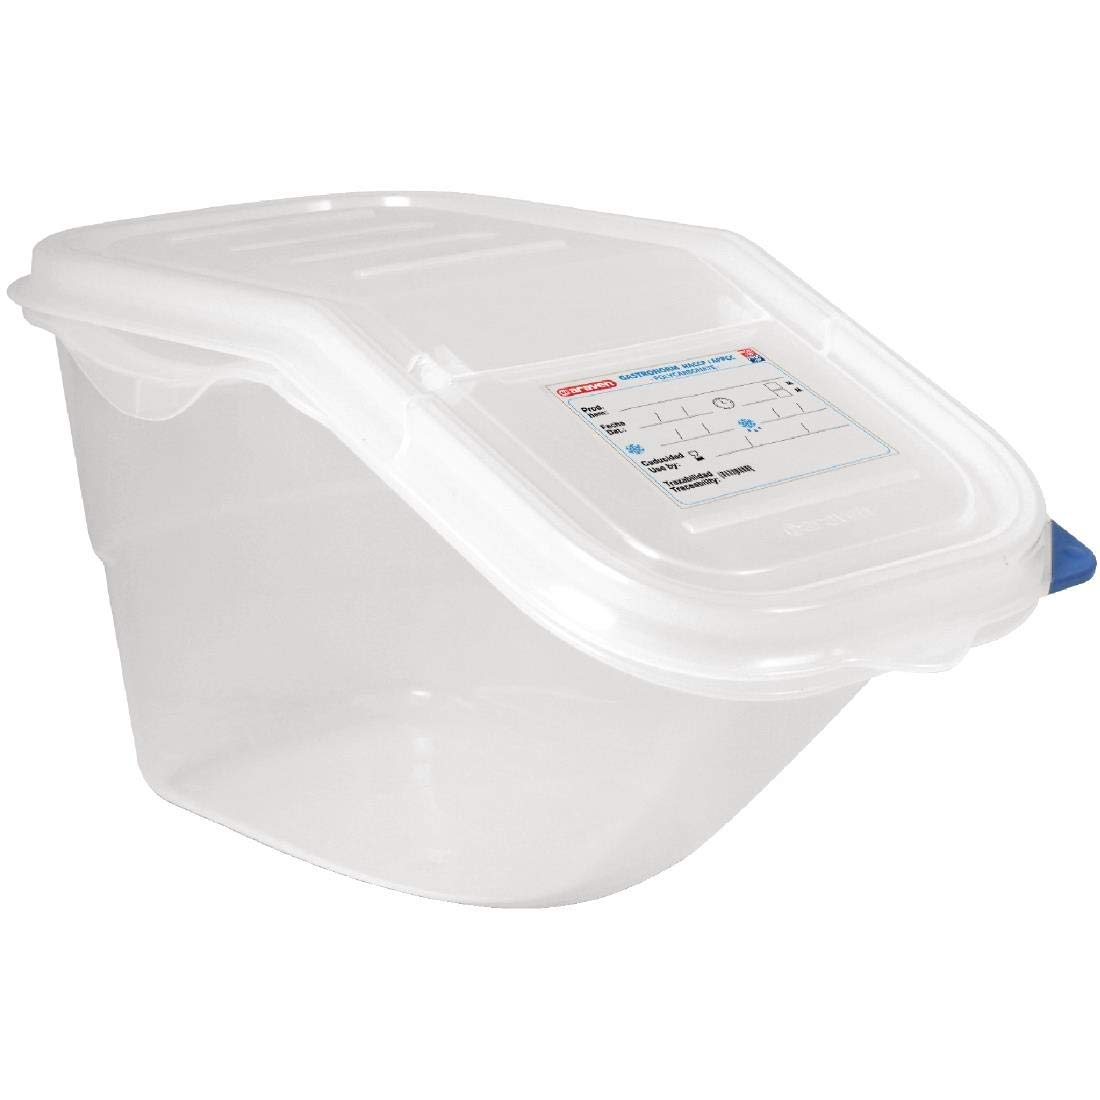 Araven 9146 Accessible Container with lid GN 44199, Weiß, 200(h) x 200(w) x 395(d)mm.